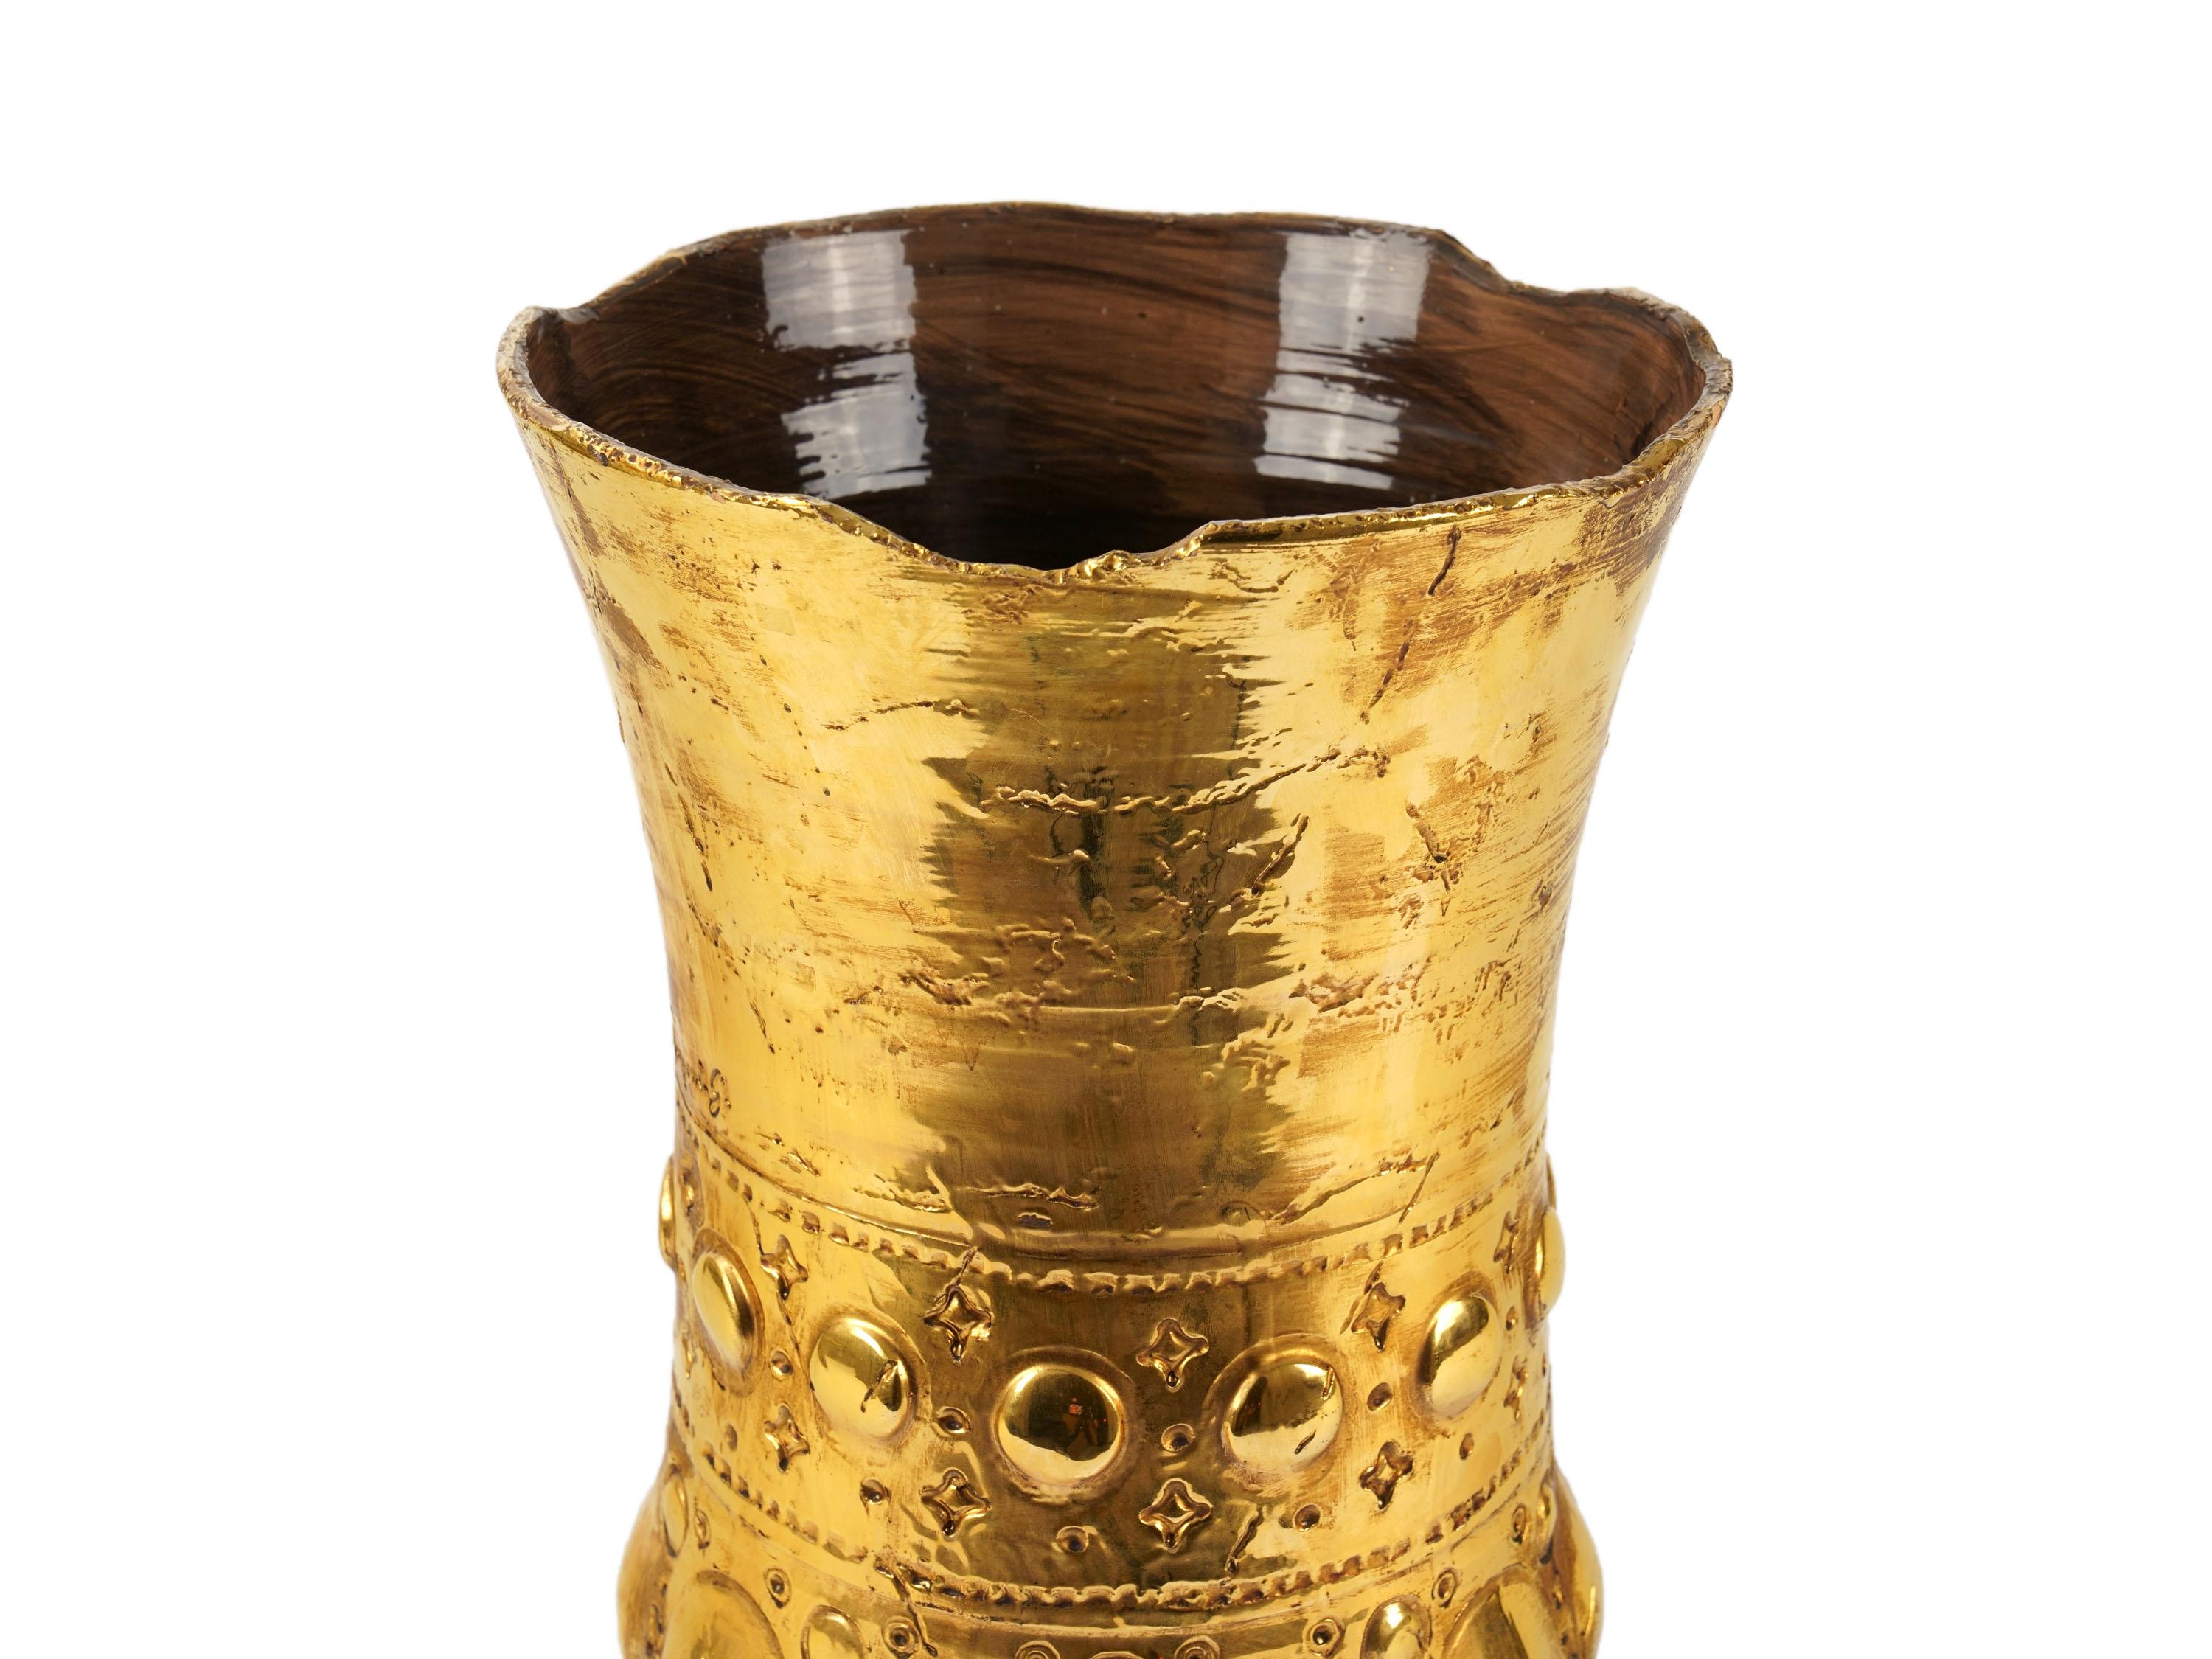 Sculptural vase handmade in Italy and decorated with the luster technique in 24 Kt gold. Dimensions: D 29 cm, H 46 cm. The entire manufacturing process is handmade in Italy.
The vase draws inspiration from one of the most characteristic products of